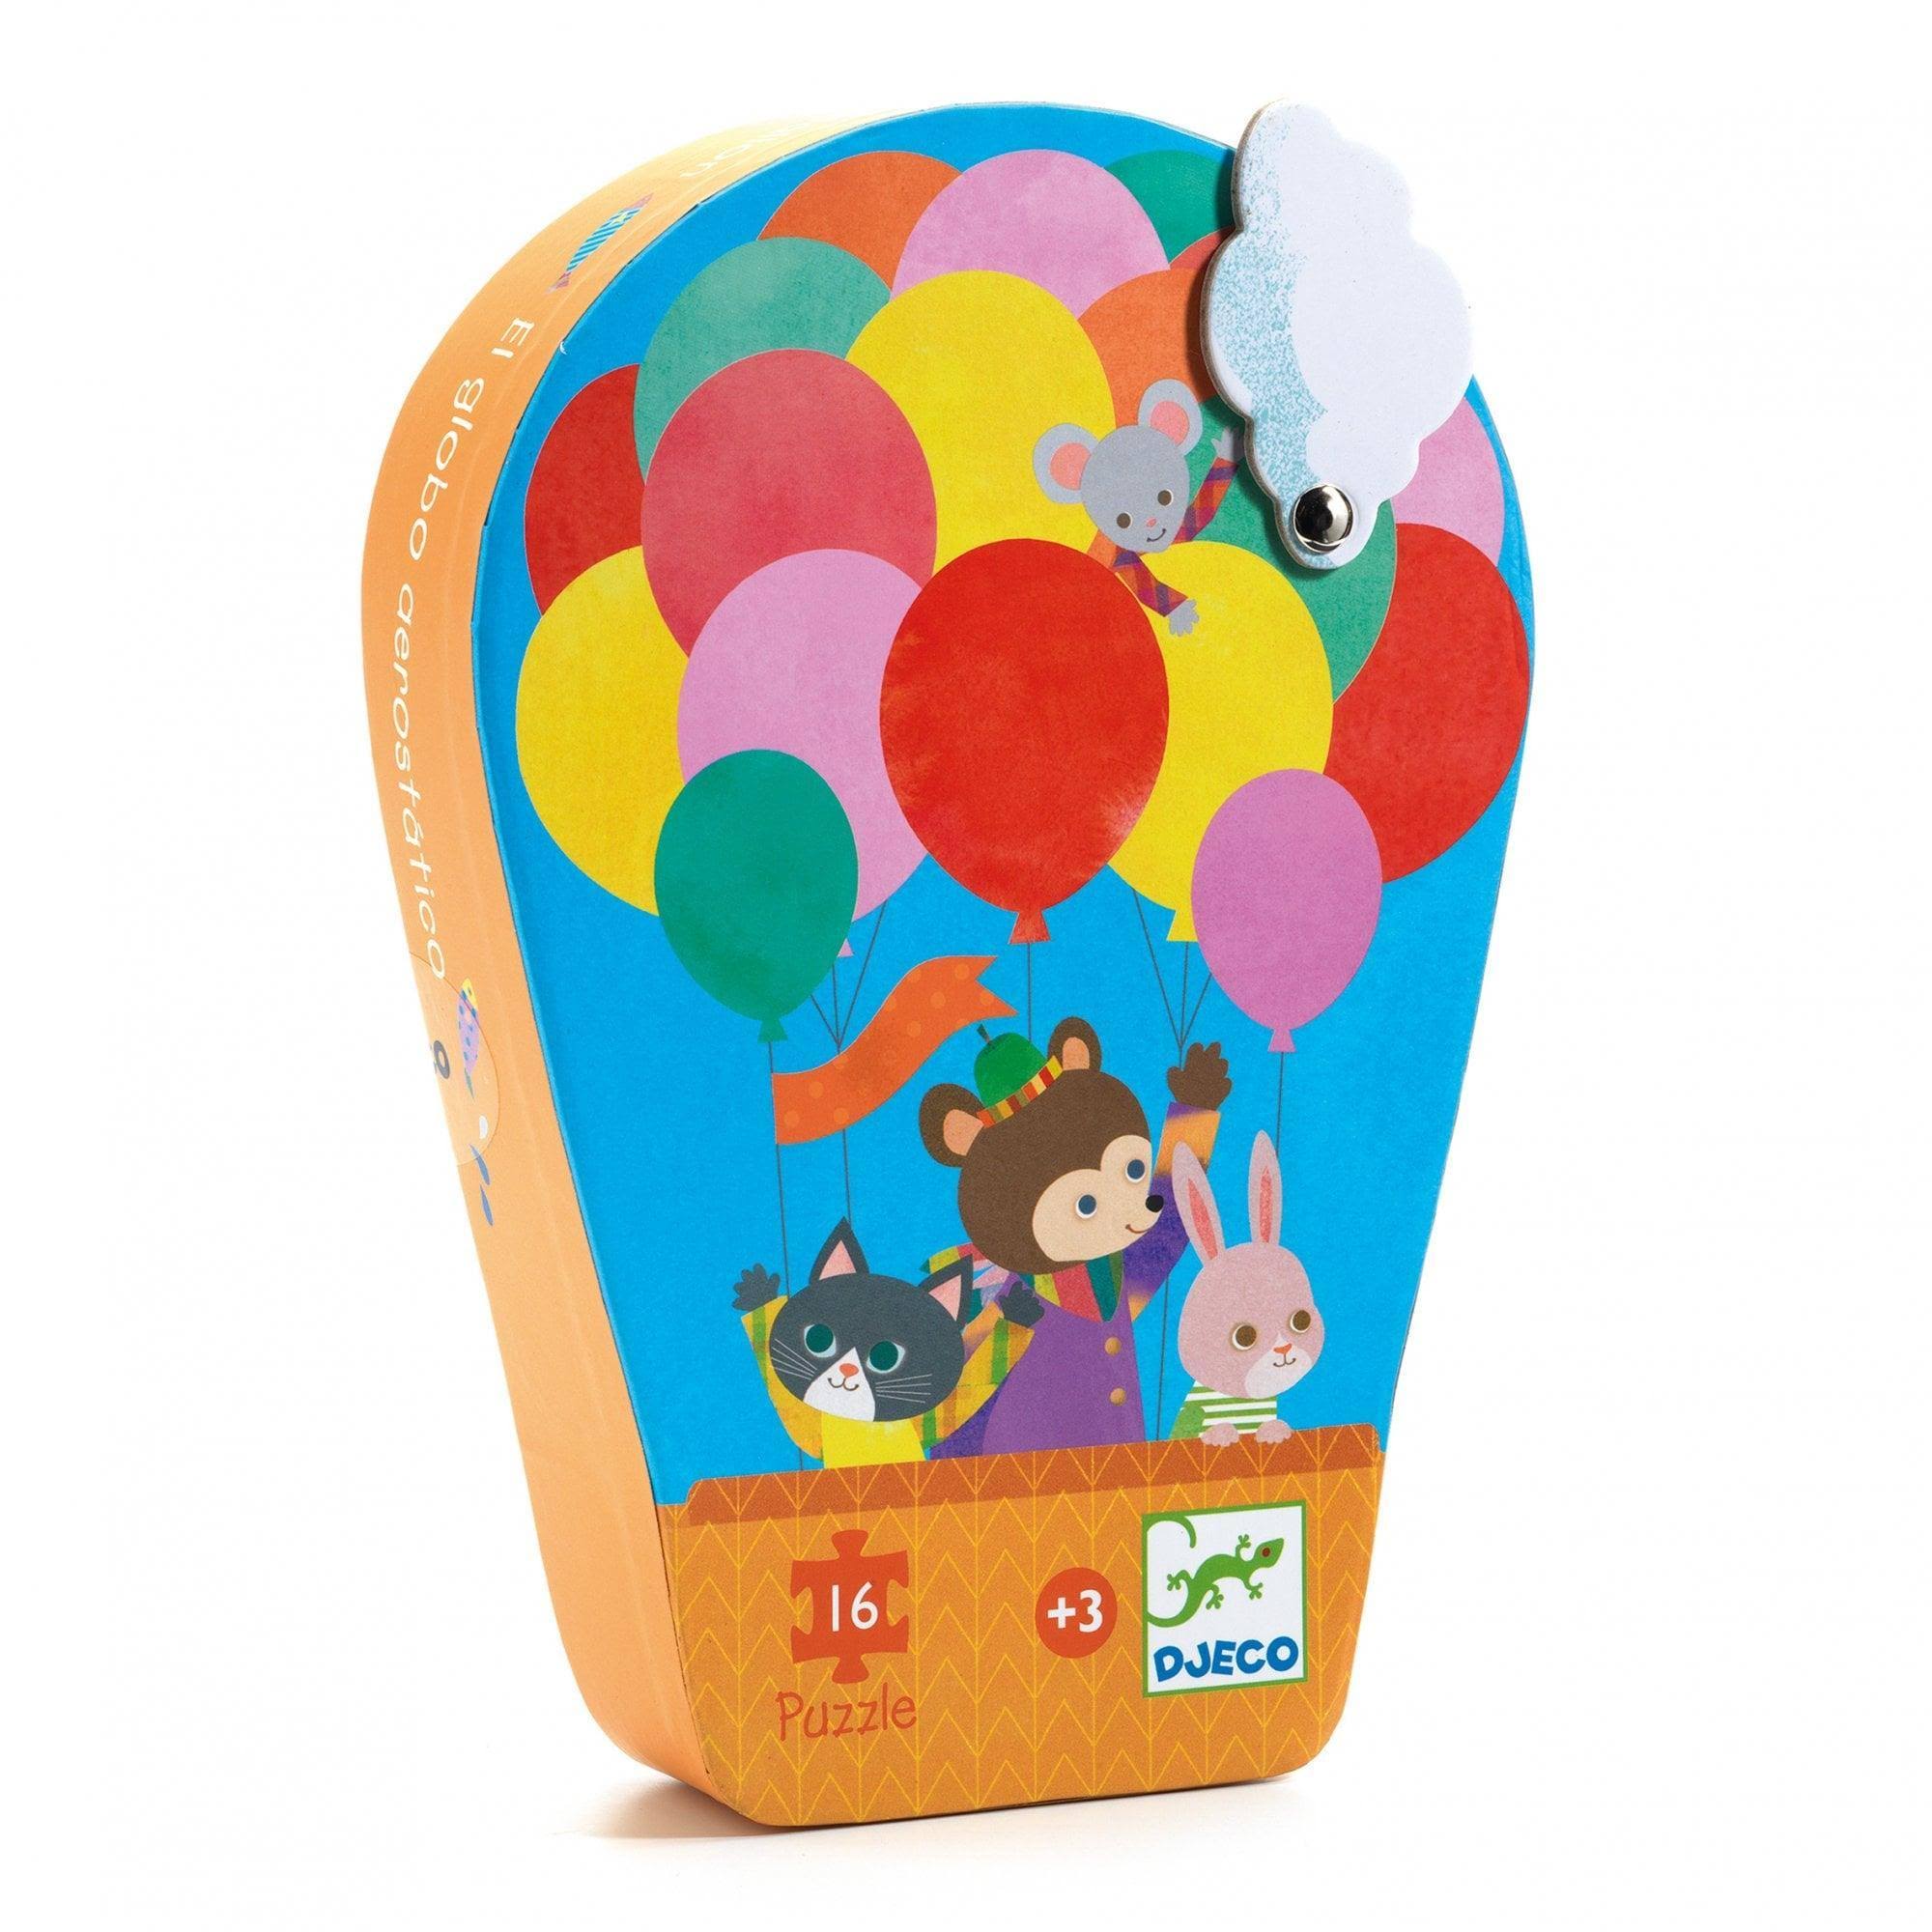 Djeco Puzzle Silhouette 16 pcs Hot Air Balloon